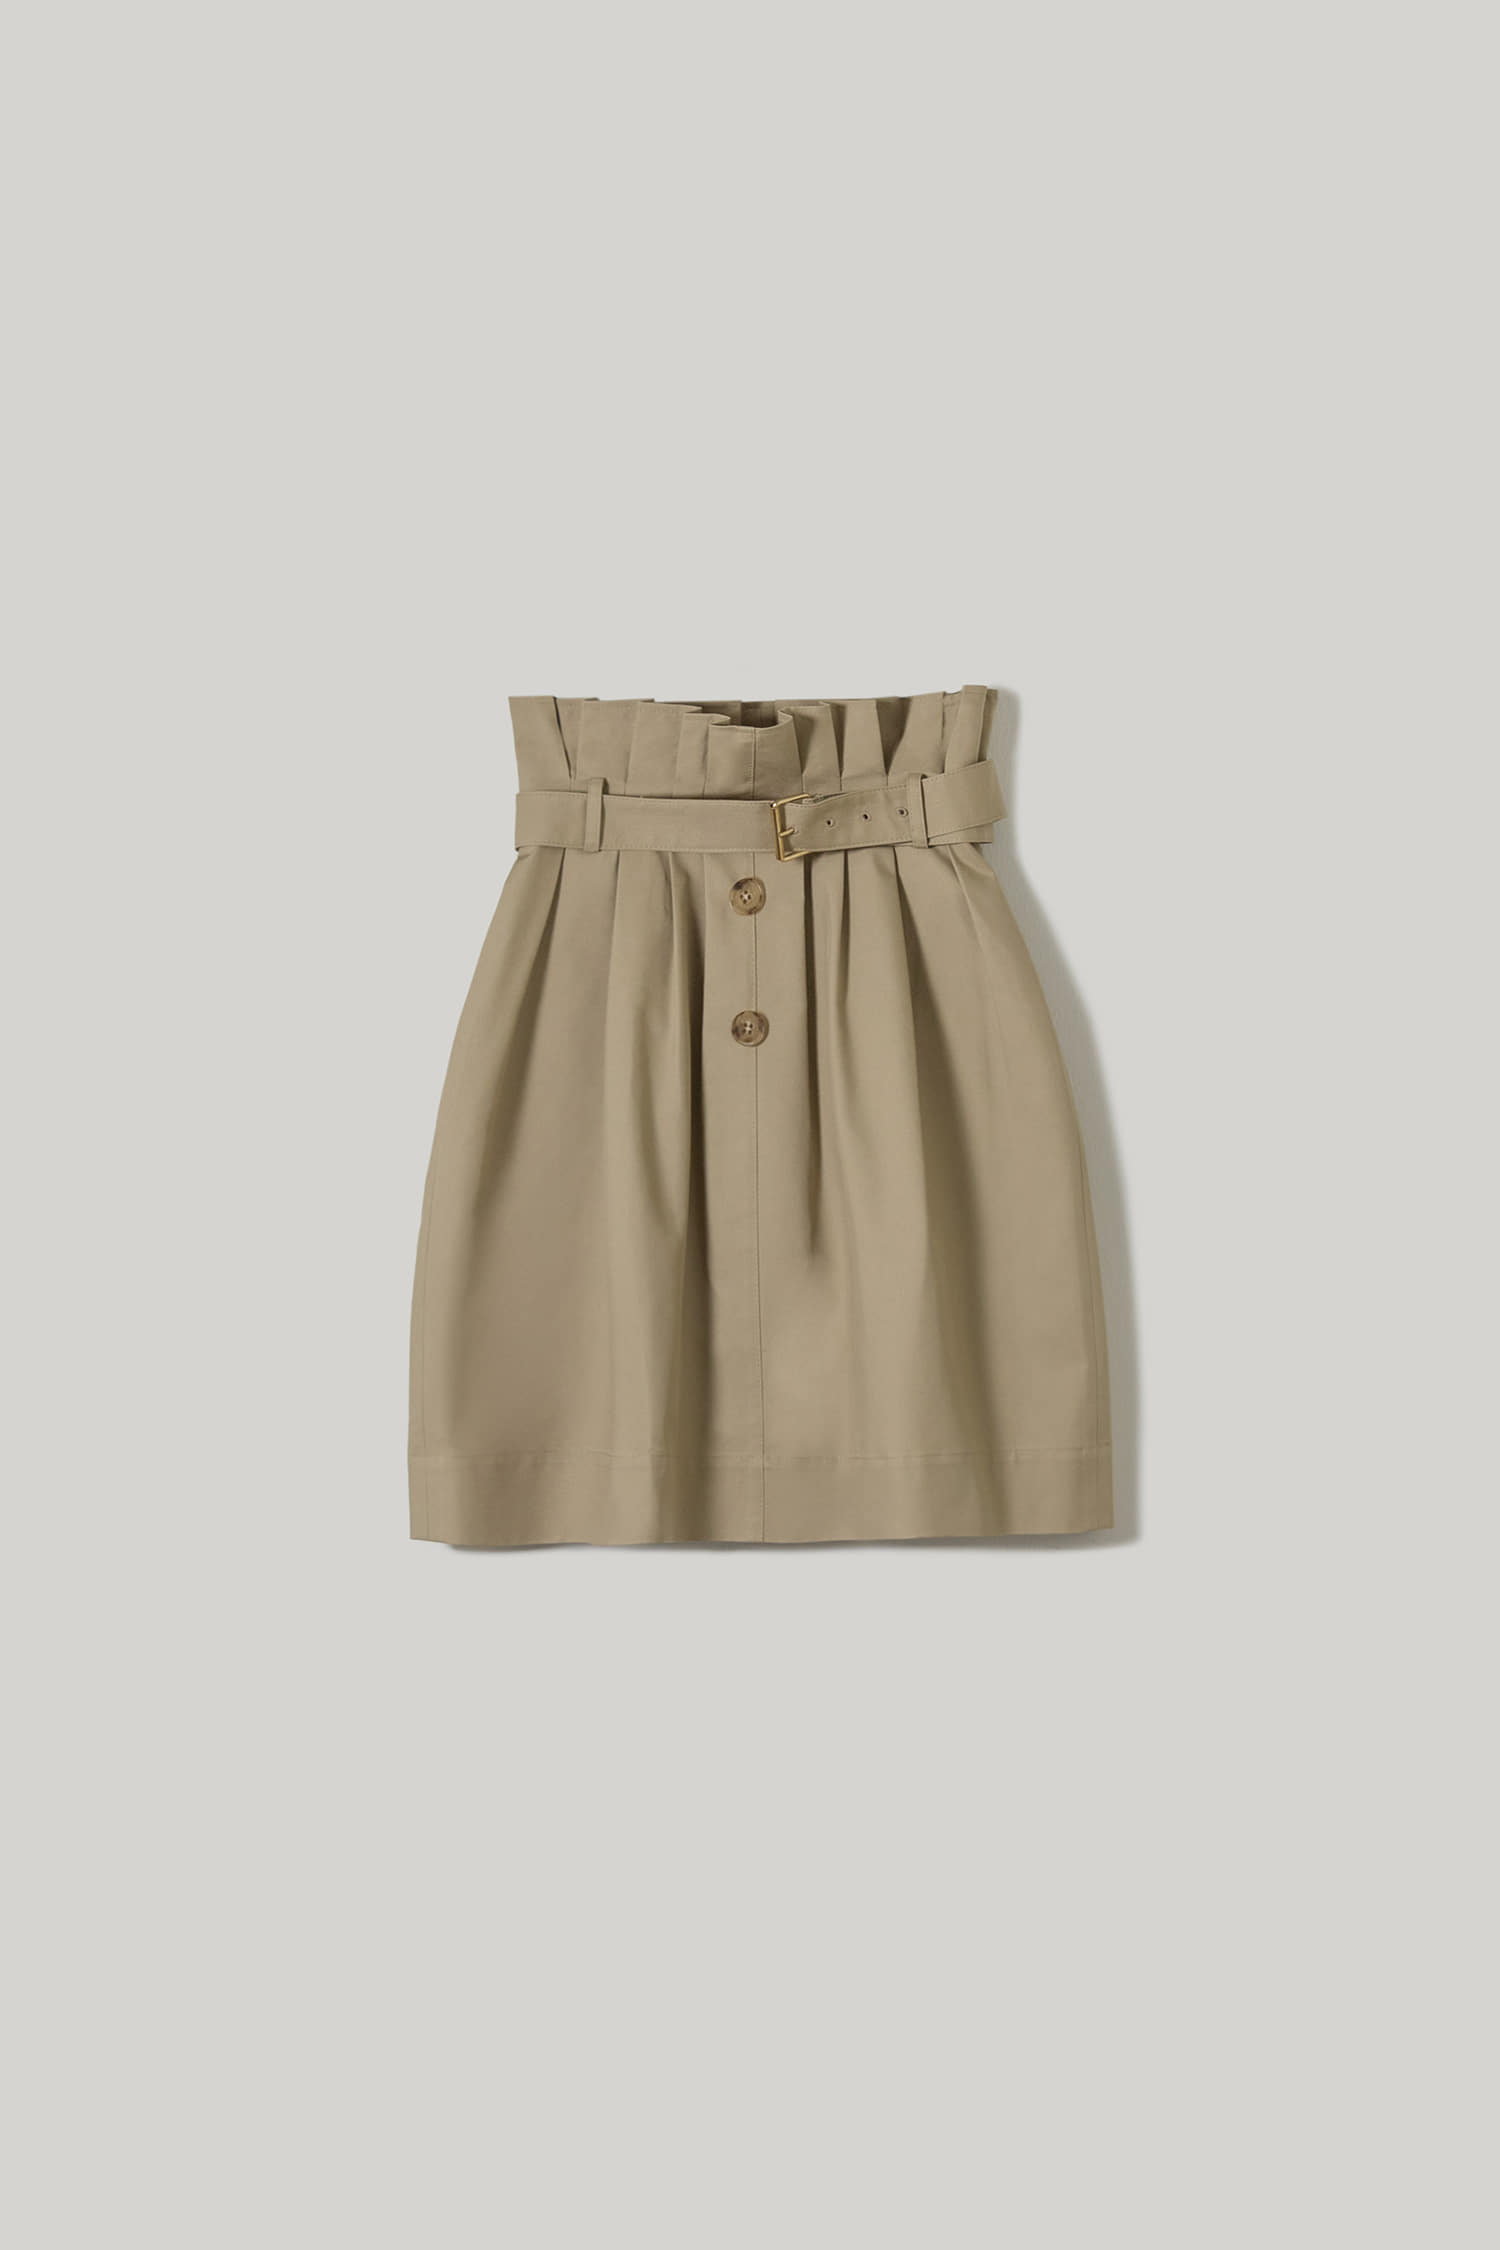 Prea Belted Skirt(2colors)